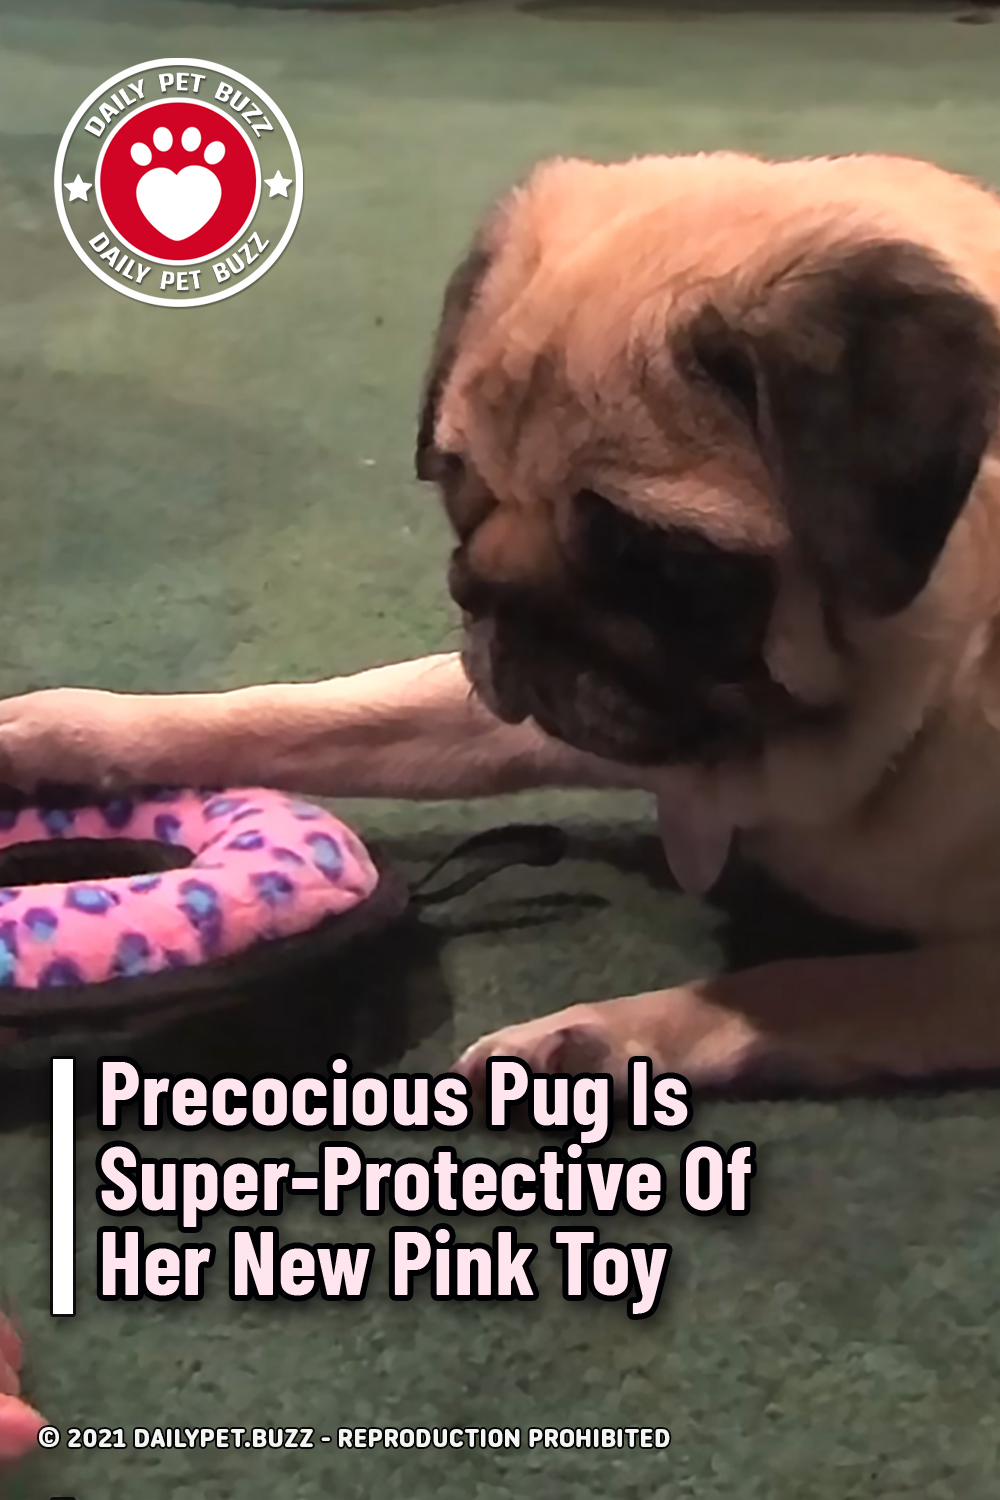 Precocious Pug Is Super-Protective Of Her New Pink Toy